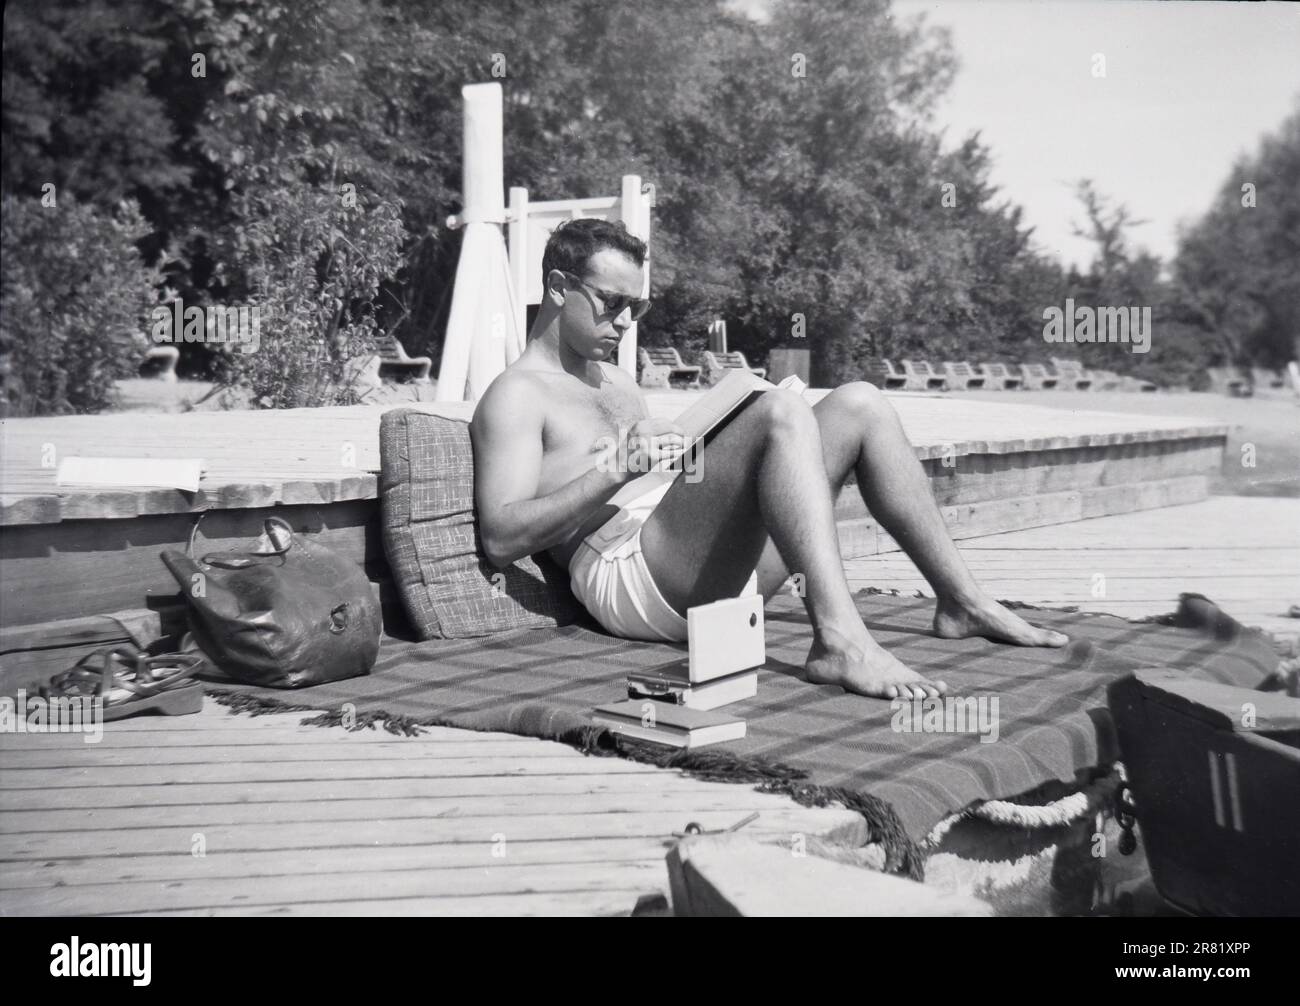 College Student 1949 1950 studying reading by a lake Syracuse University New York NY vintage B&W Stock Photo